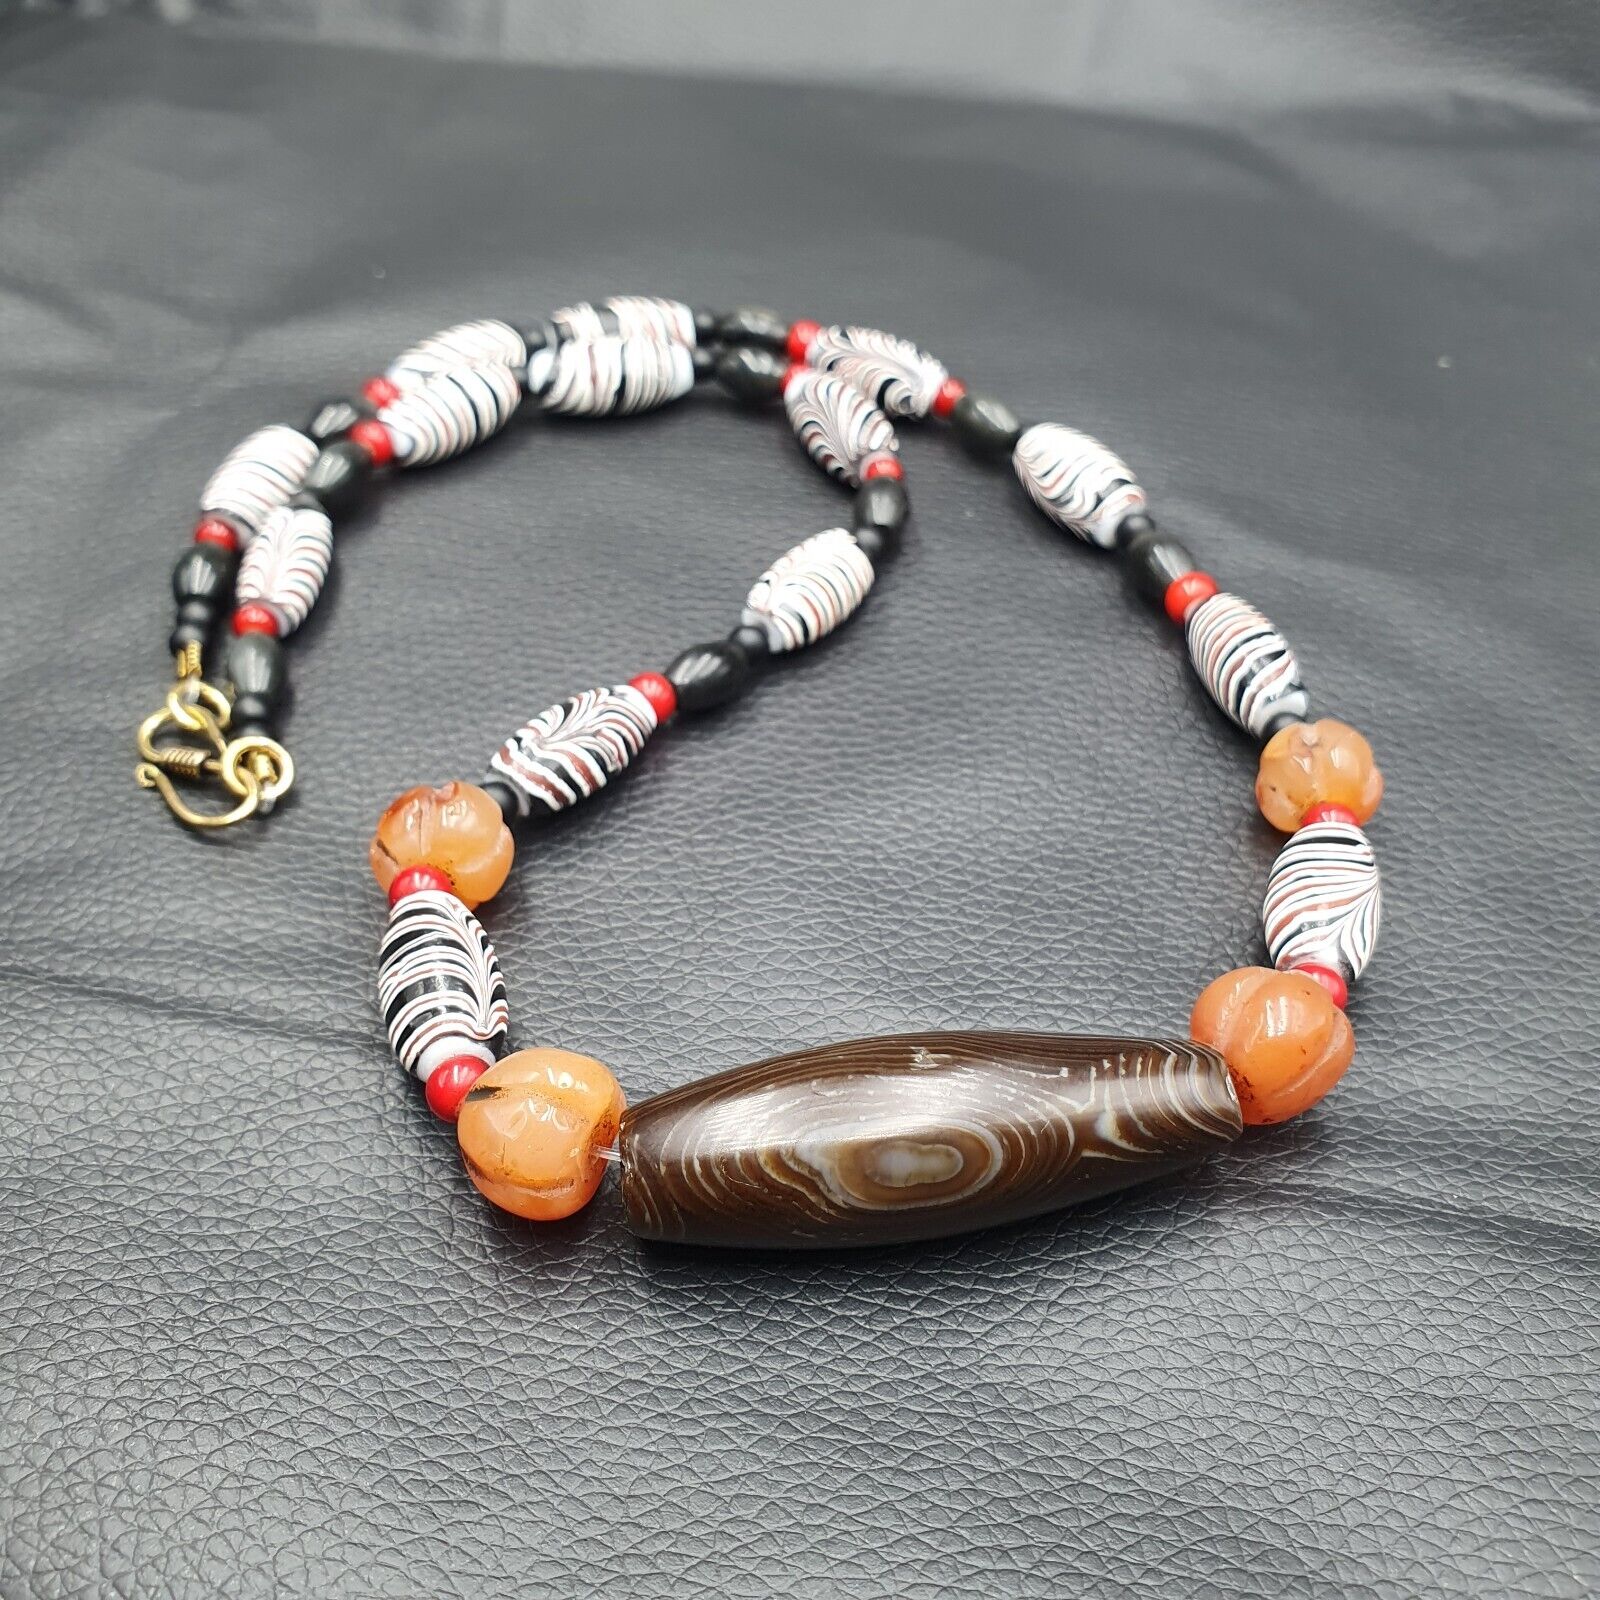 Indo Tibetan Himalayan Agate and Glass beads necklace YMN3